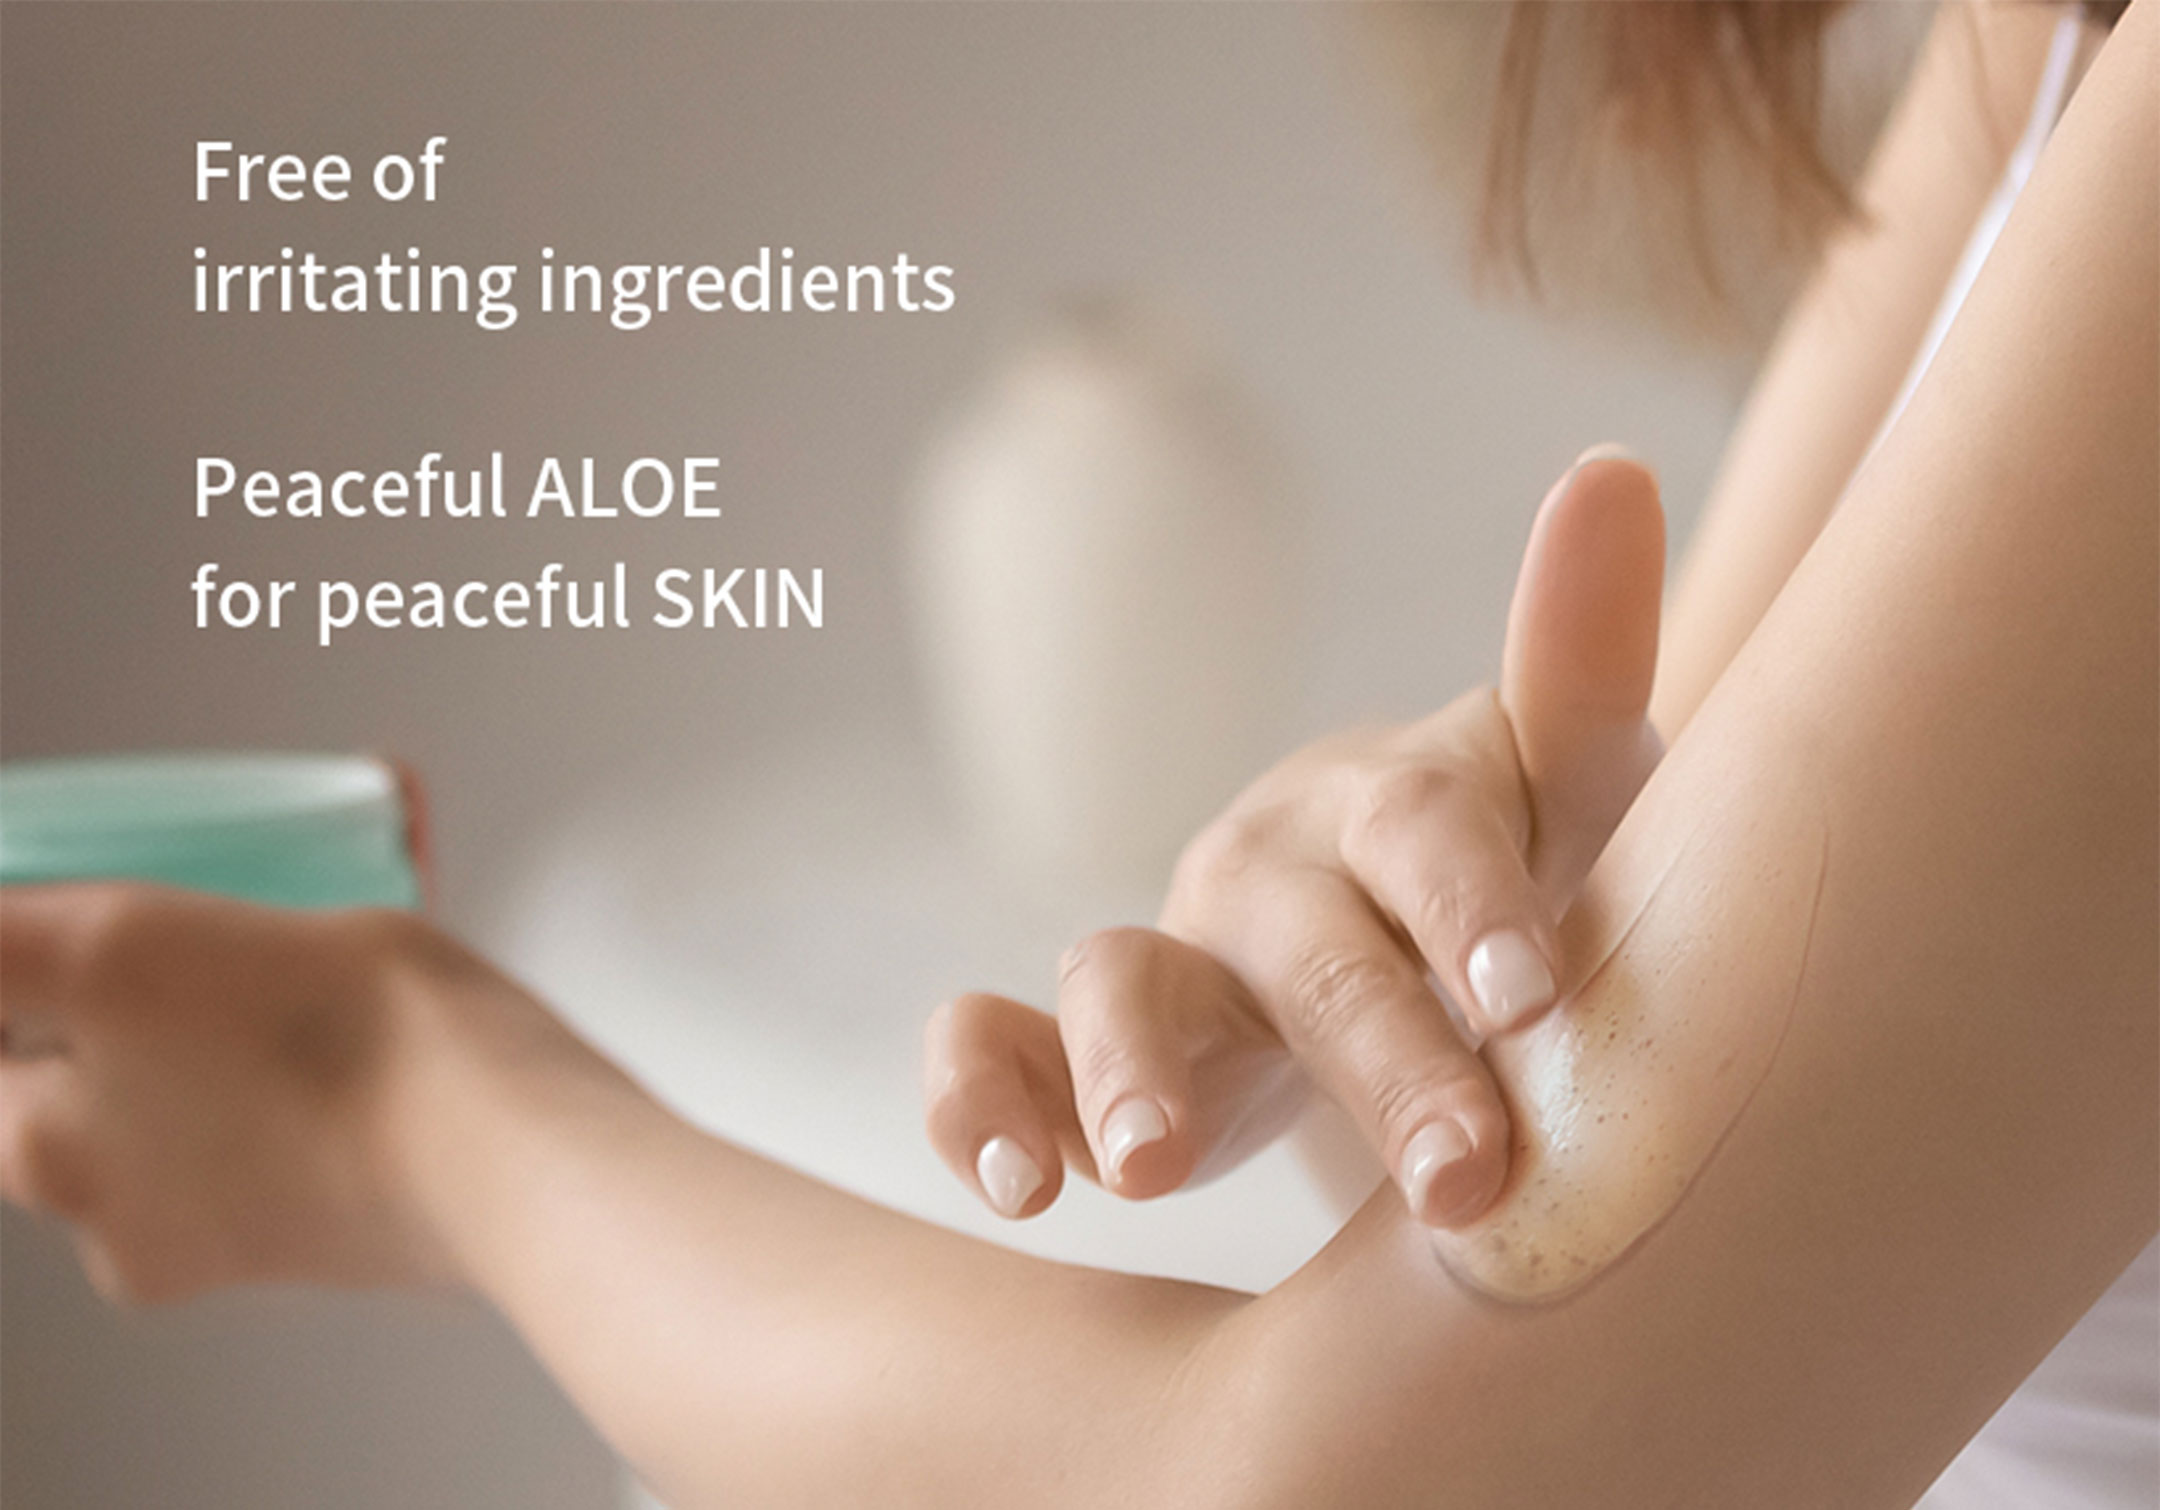 aloe skin demostration on a woman holding the product and applying in her arm